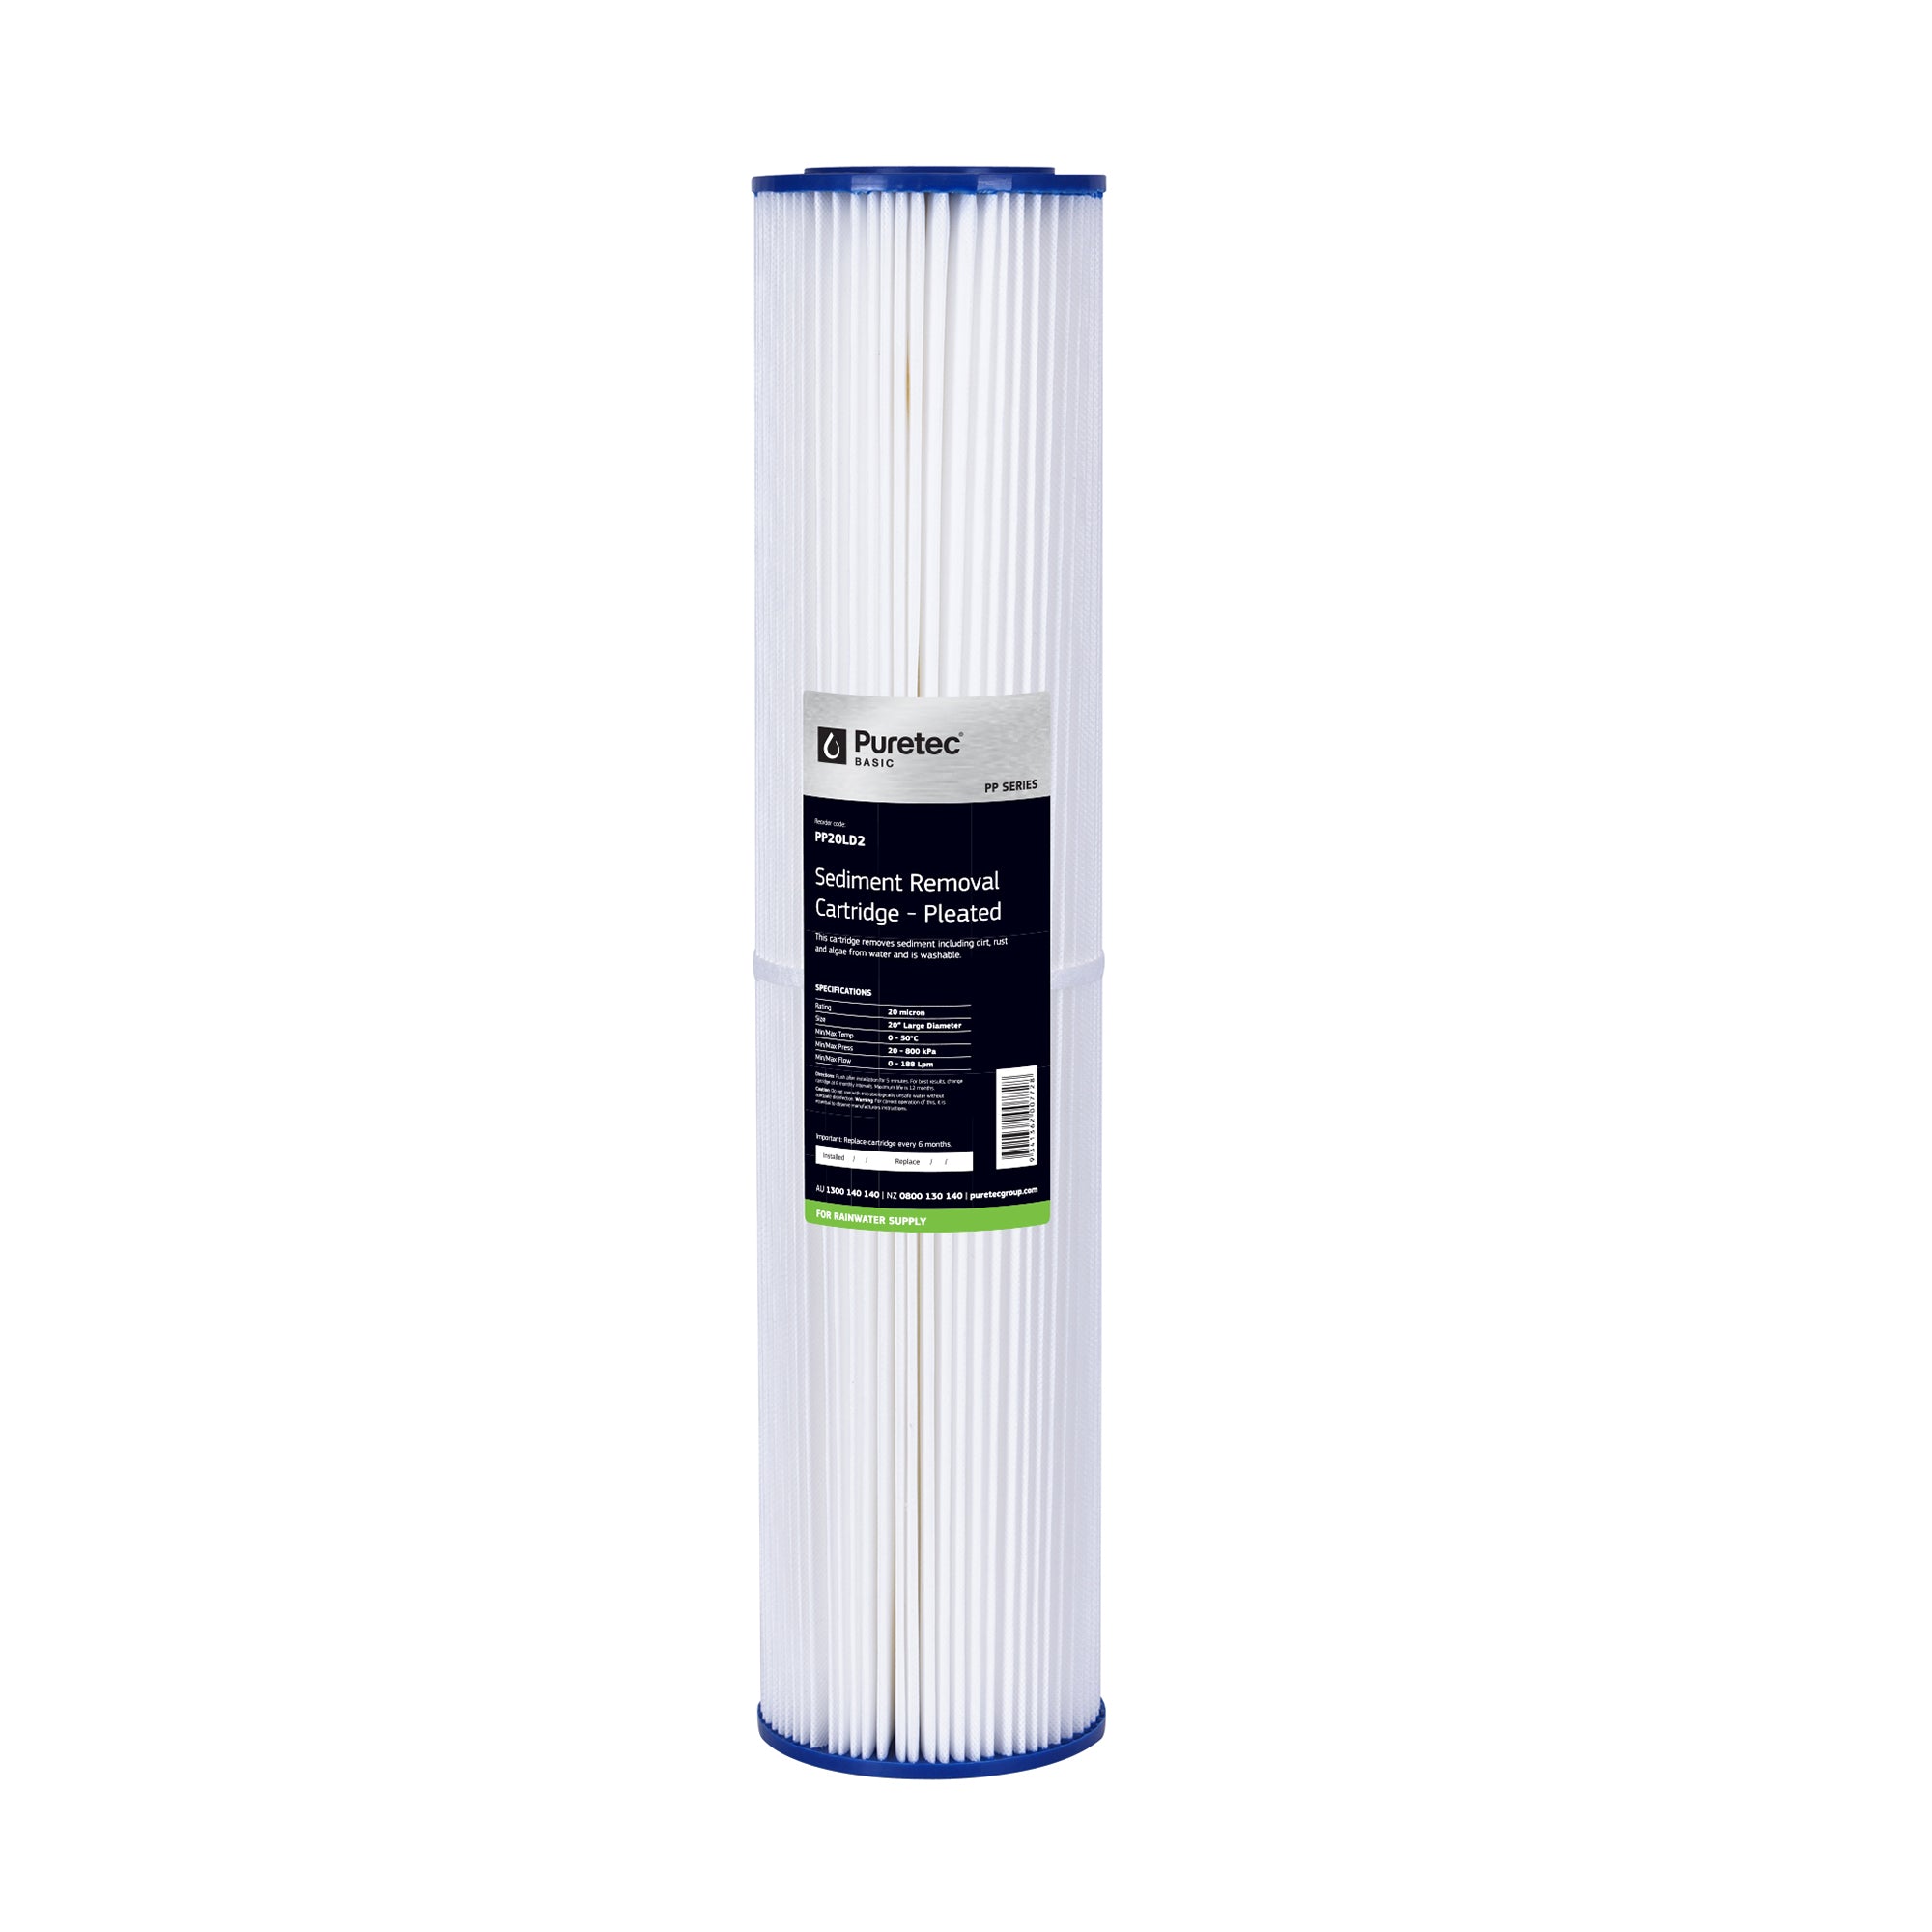 Puretec 20 inch jumbo polypleated sediment removal water filter cartridge